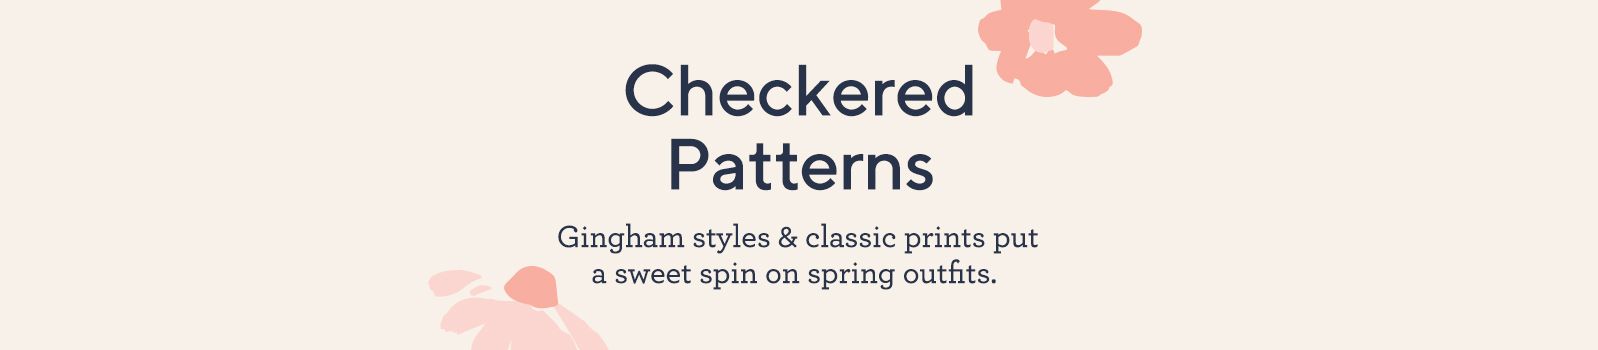 Checkered Patterns Gingham styles & classic prints put a sweet spin on spring outfits. 